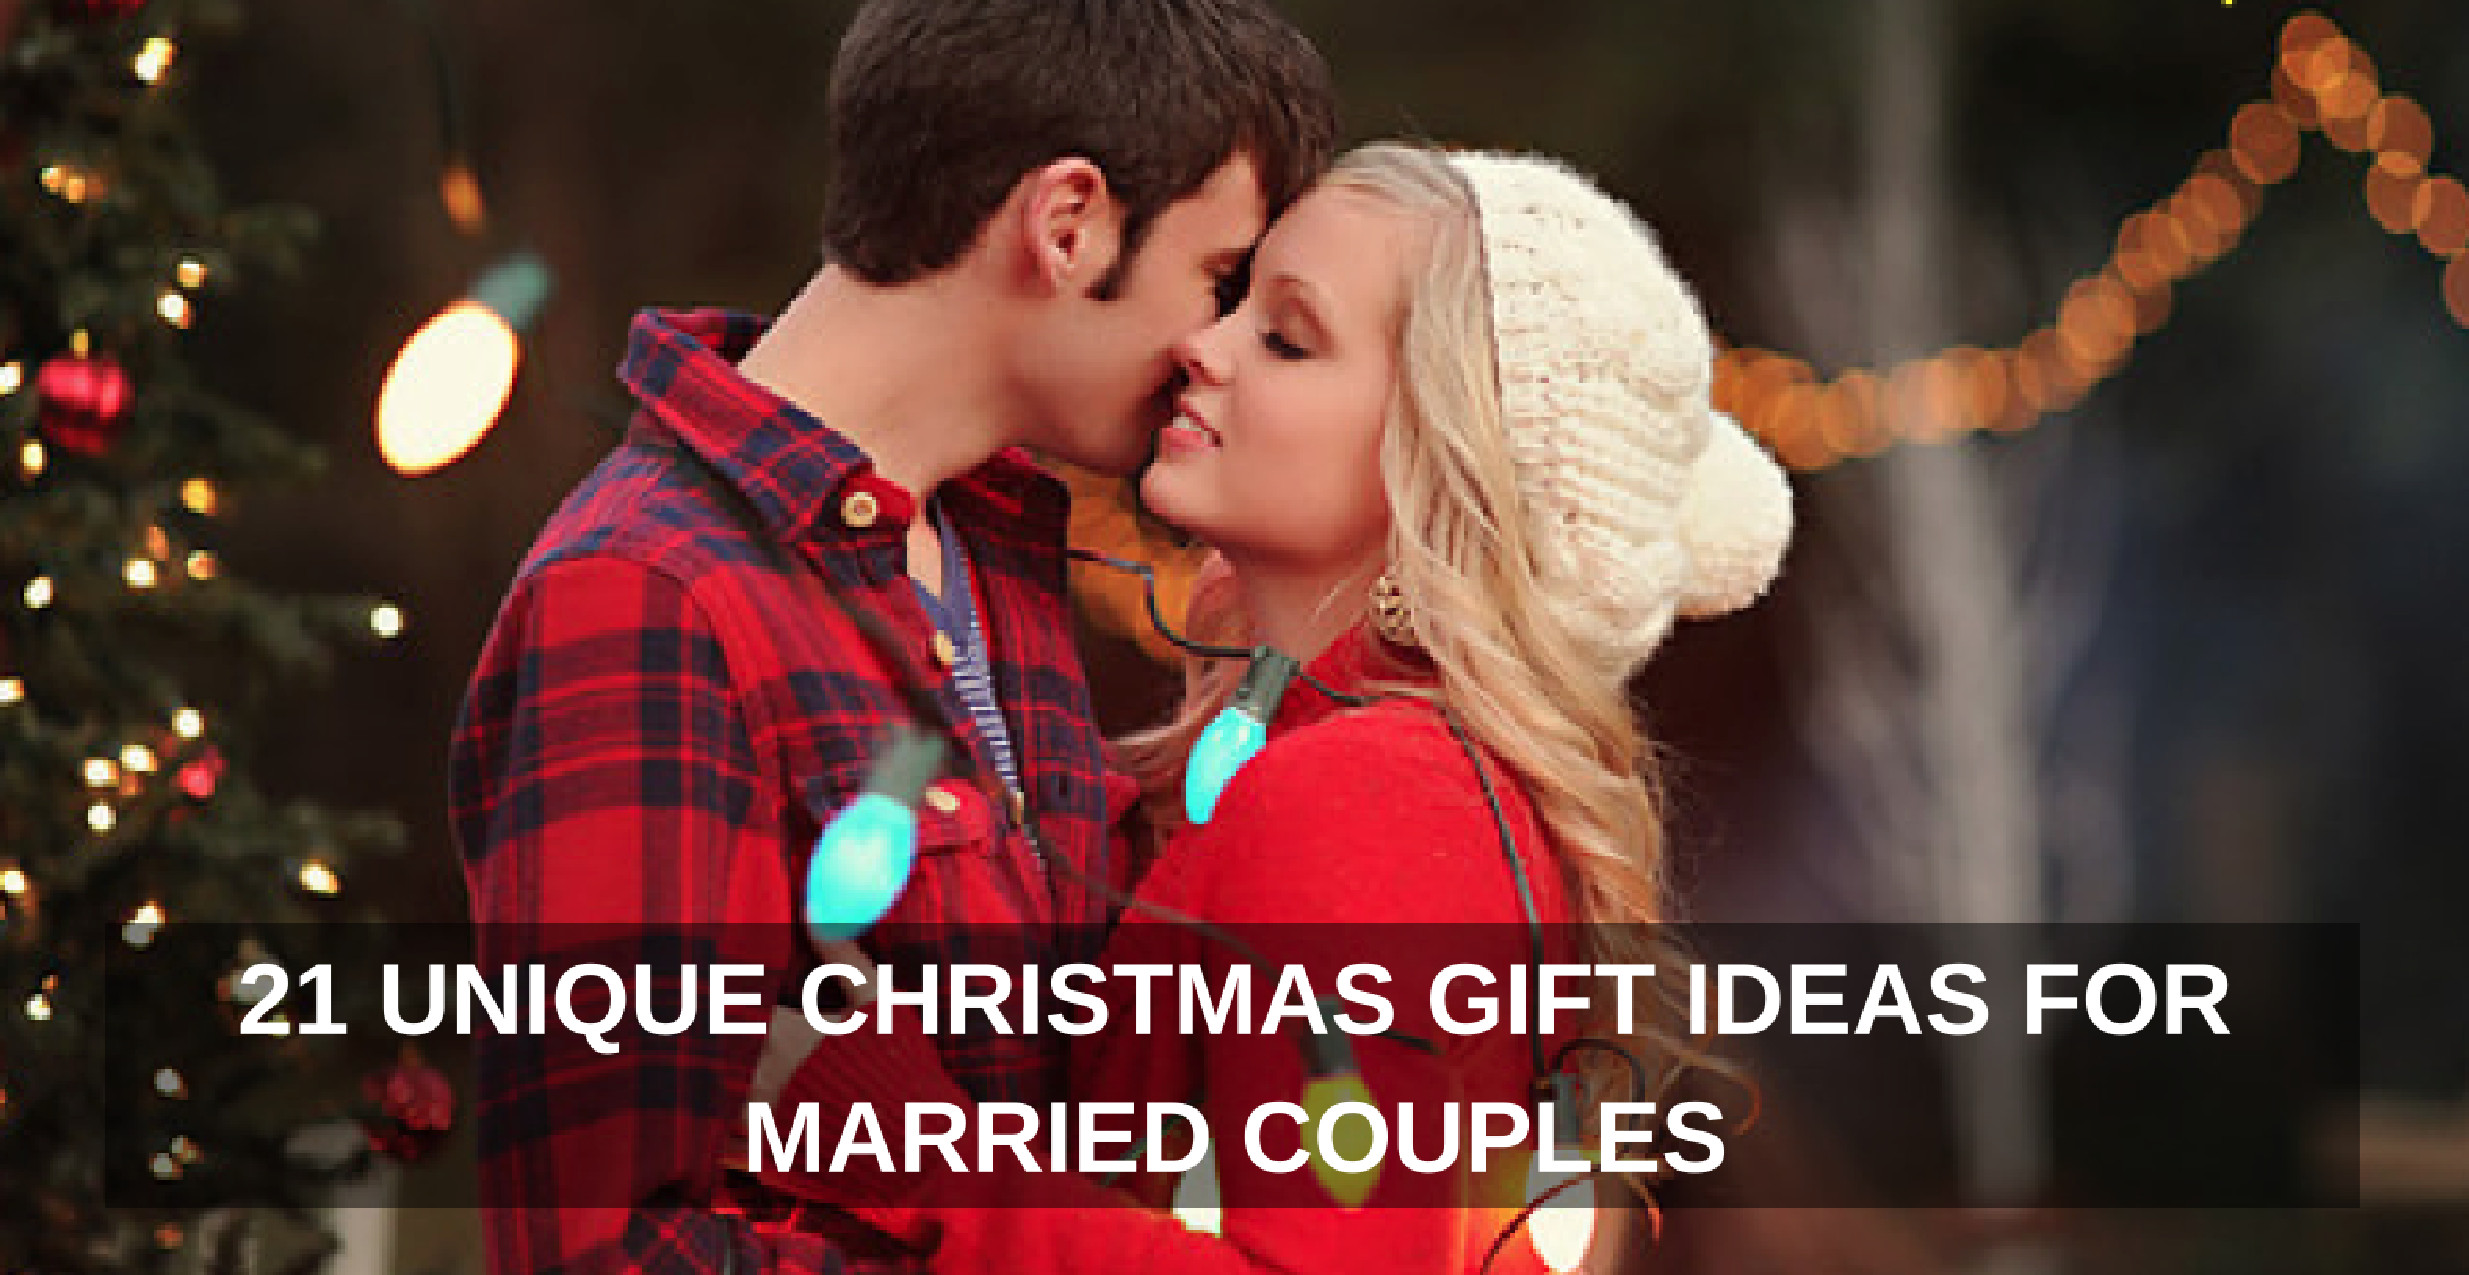 Couples Gift Ideas For Christmas
 21 Unique Christmas Gift Ideas for Married Couples